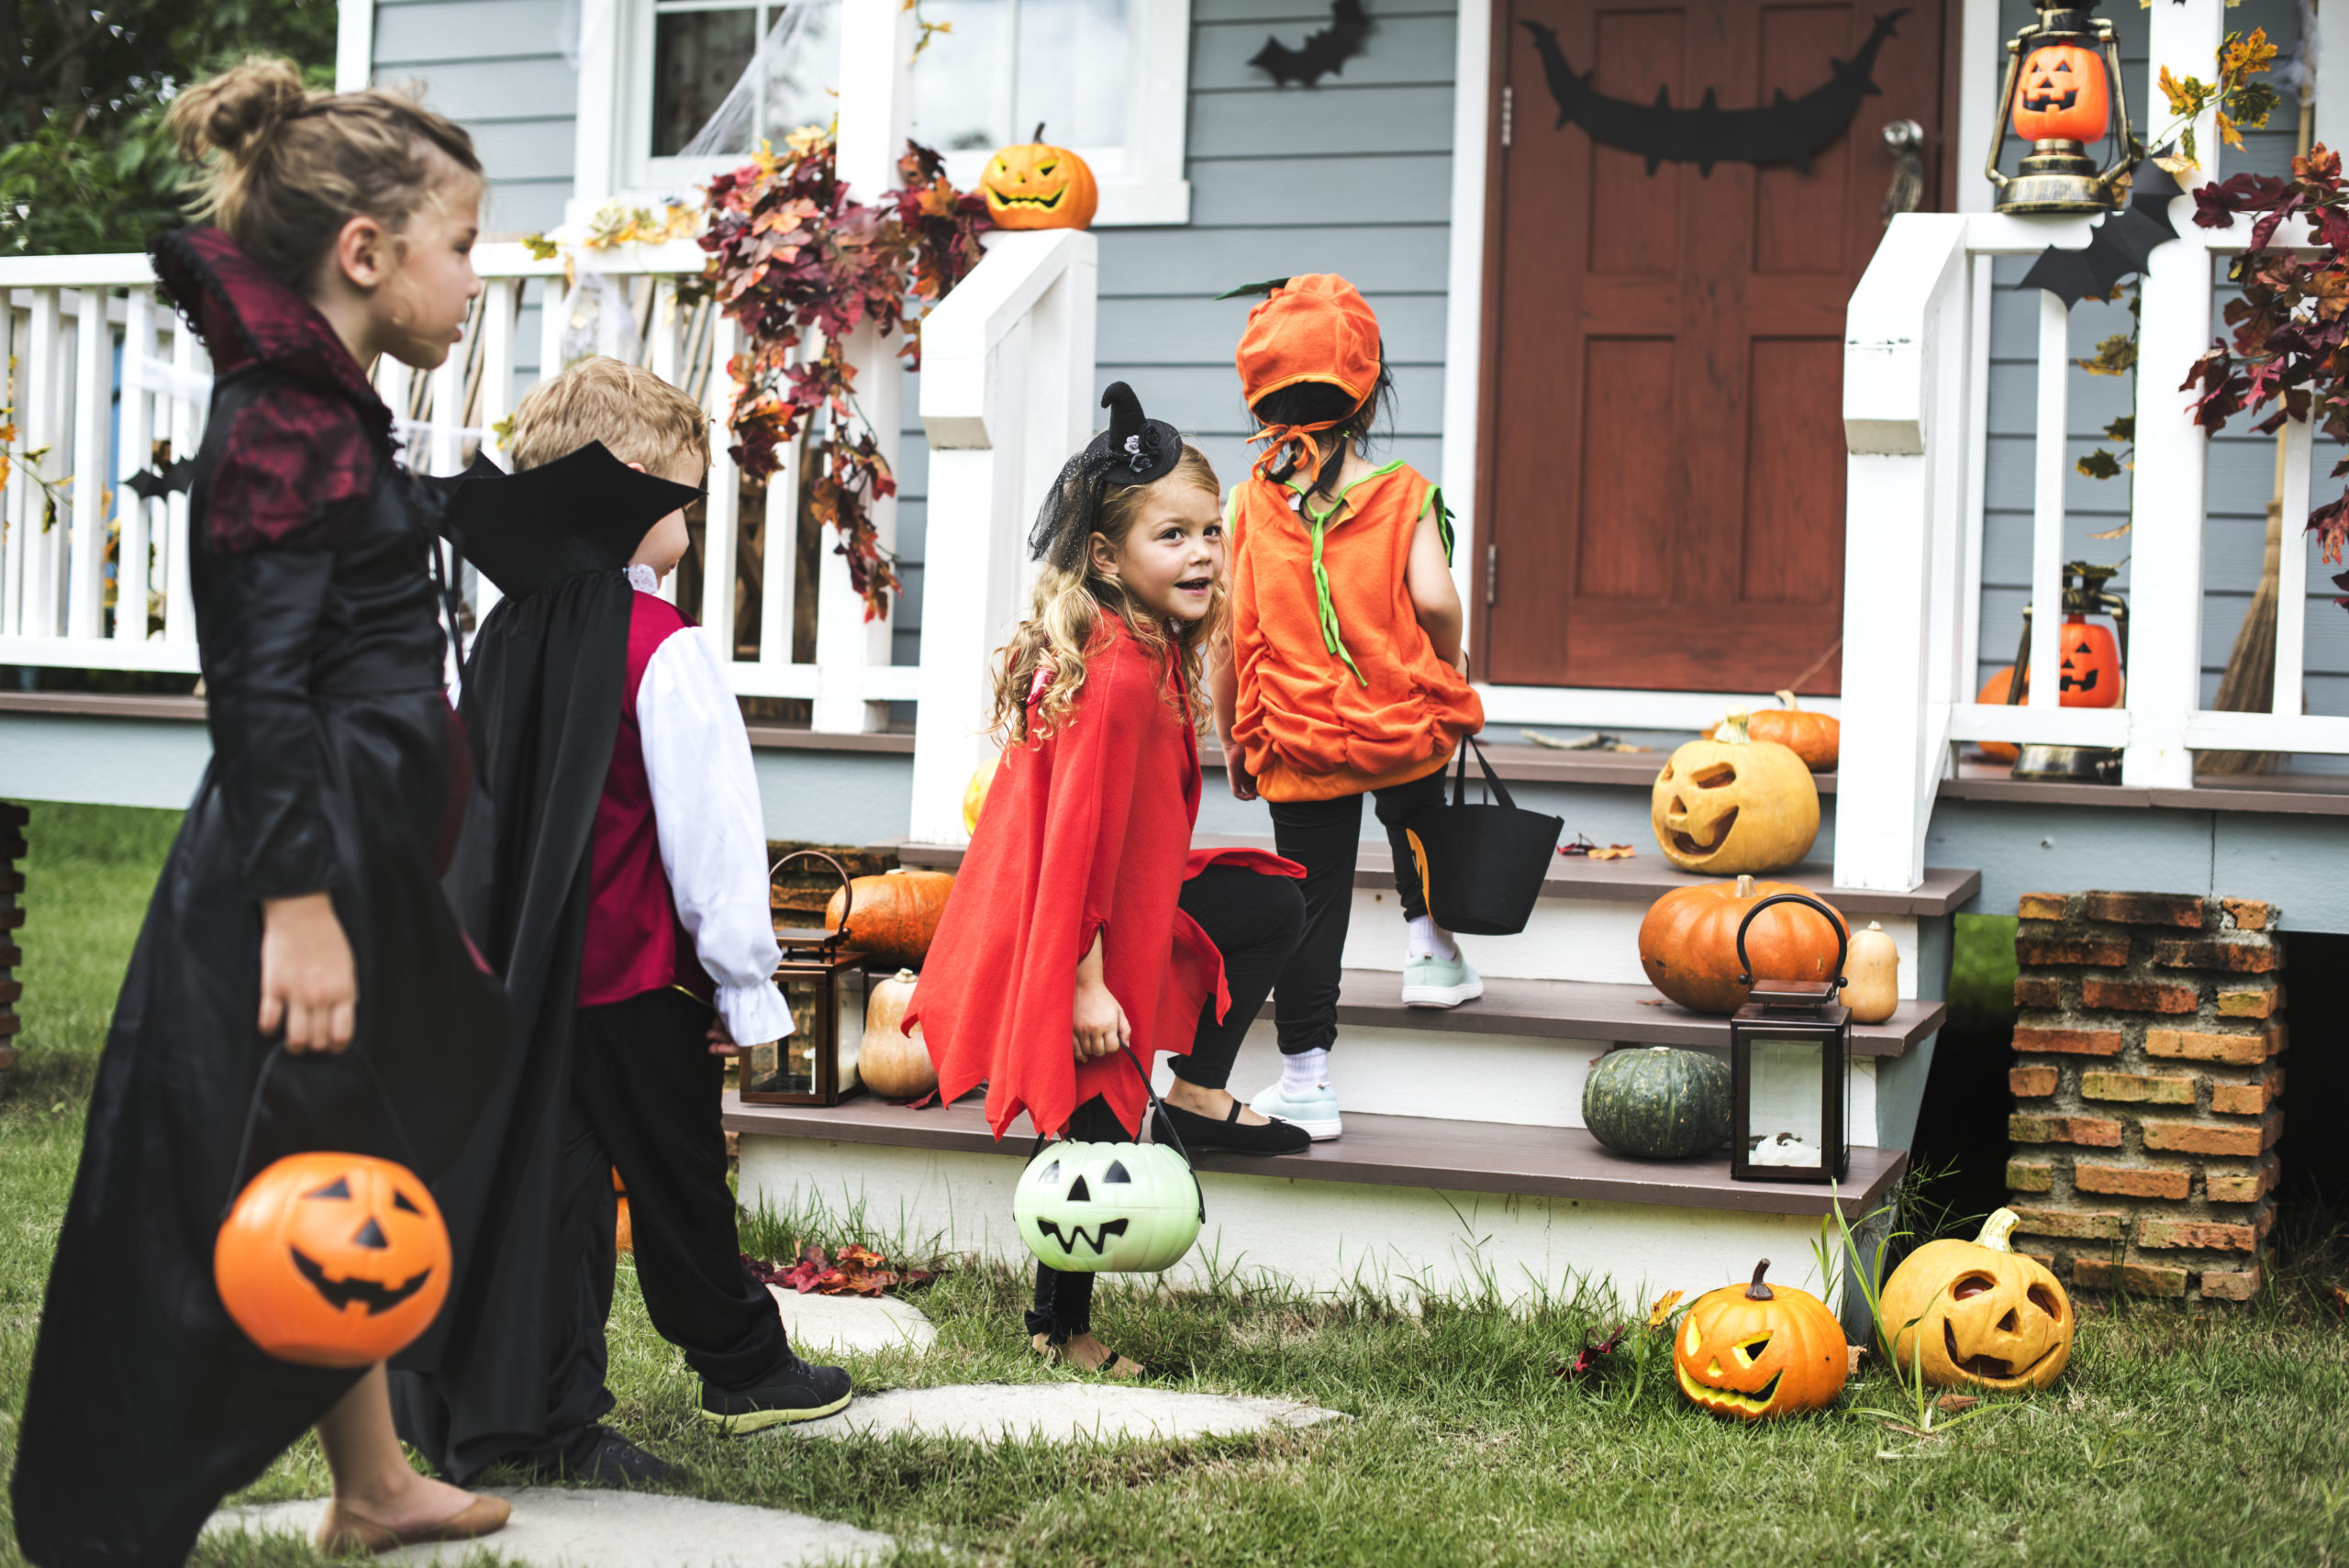 2023 Trick or Treat / Beggar's Night Times for Dayton and Miami Valley